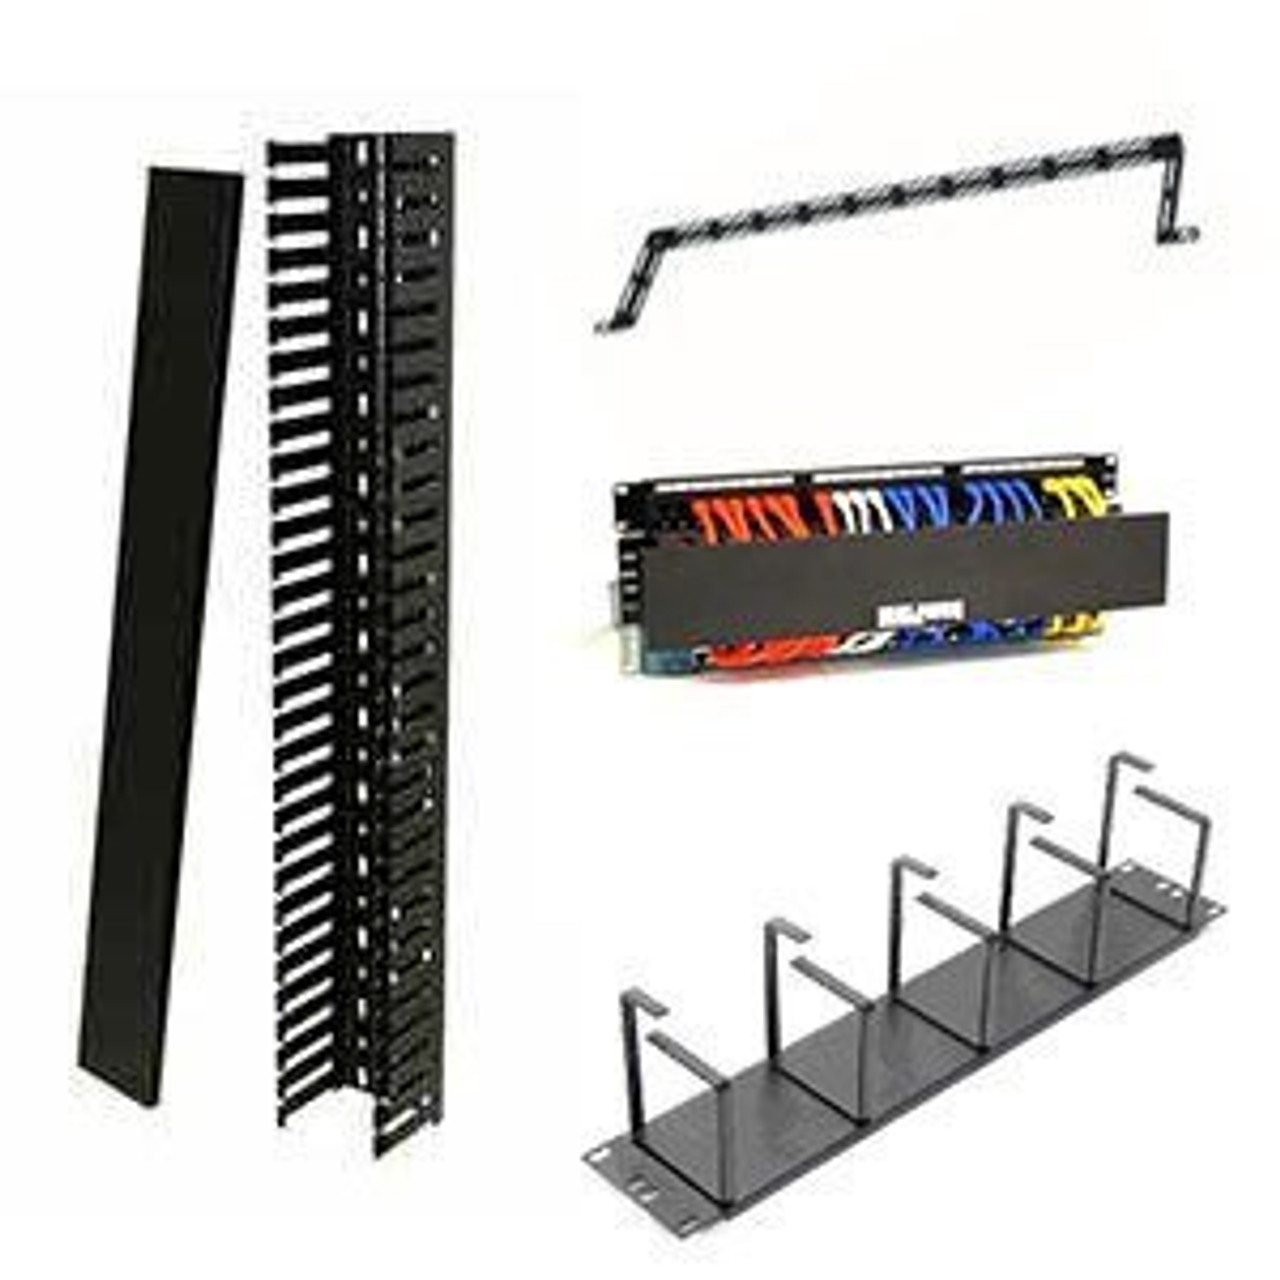 Cable Management Rack, Harness Organizer, Wire Organizer